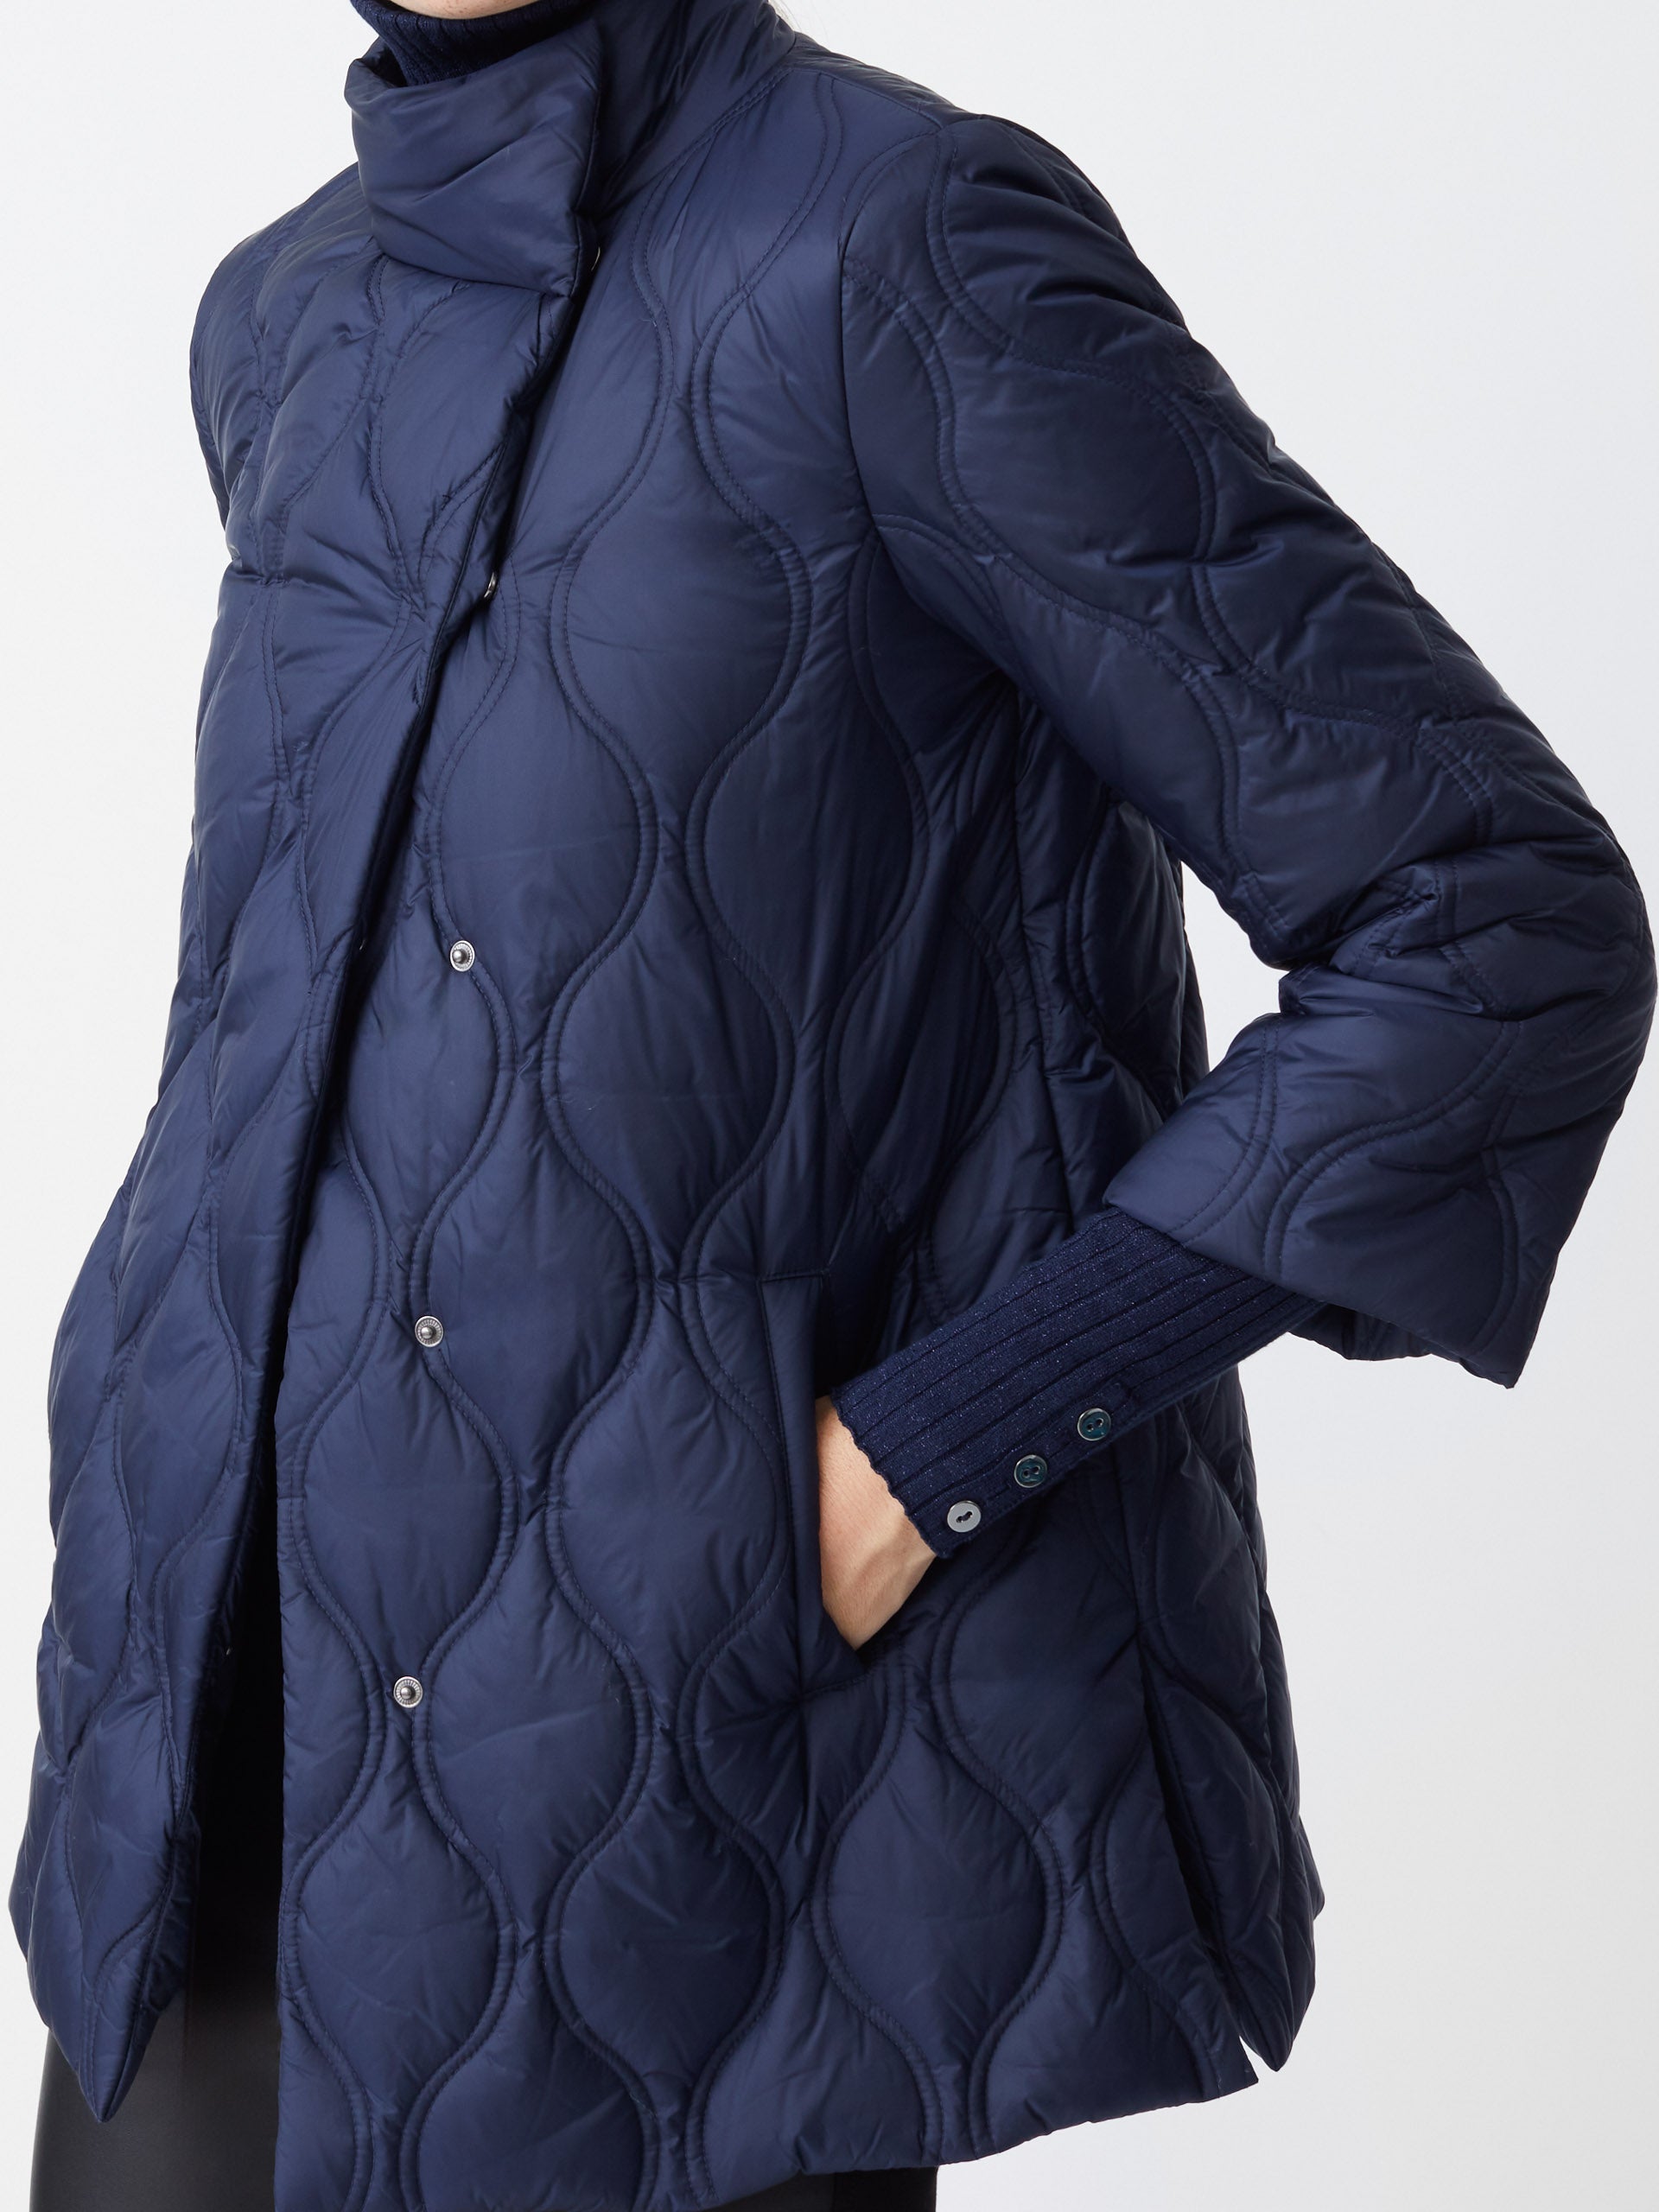 Model wearing J.McLaughlin Key puffer jacket in dark navy made with polyester.